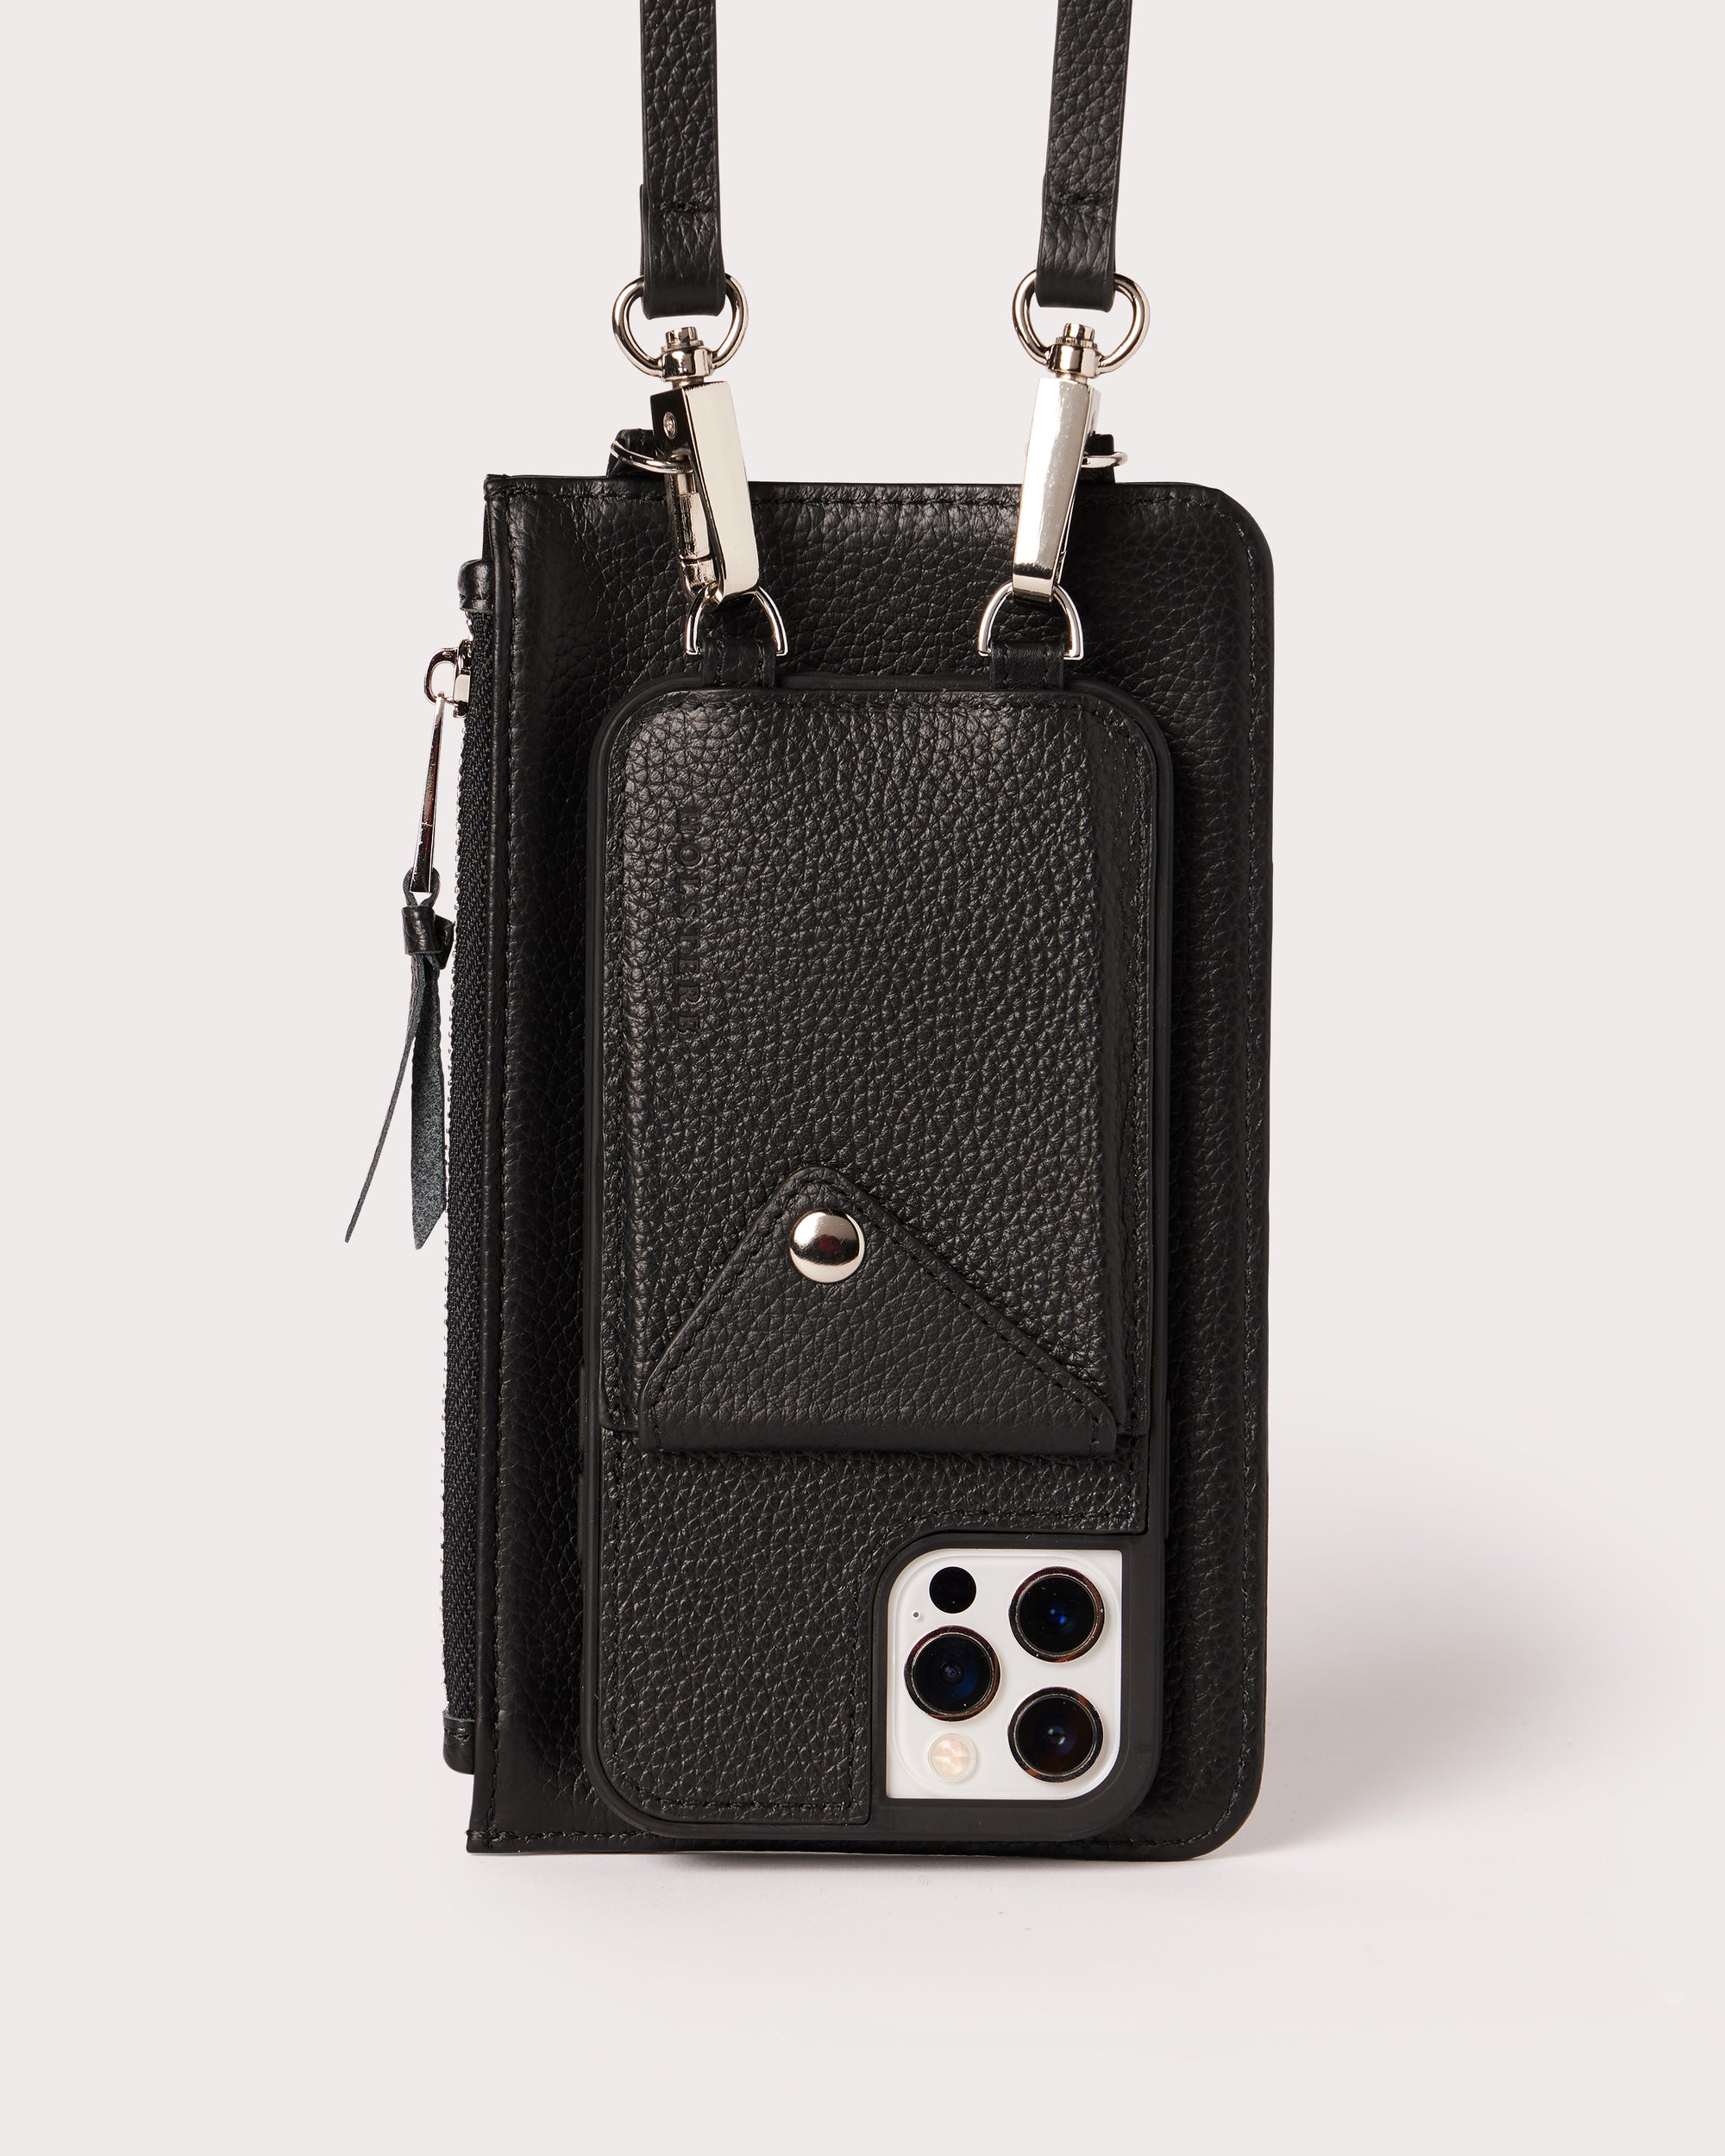 Holstere Genuine Leather iPhone Case Crossbody Phone Purse Cross Body Add On Zipper Zipped Pouch Black for Extra Carry Space with Silver Zipper